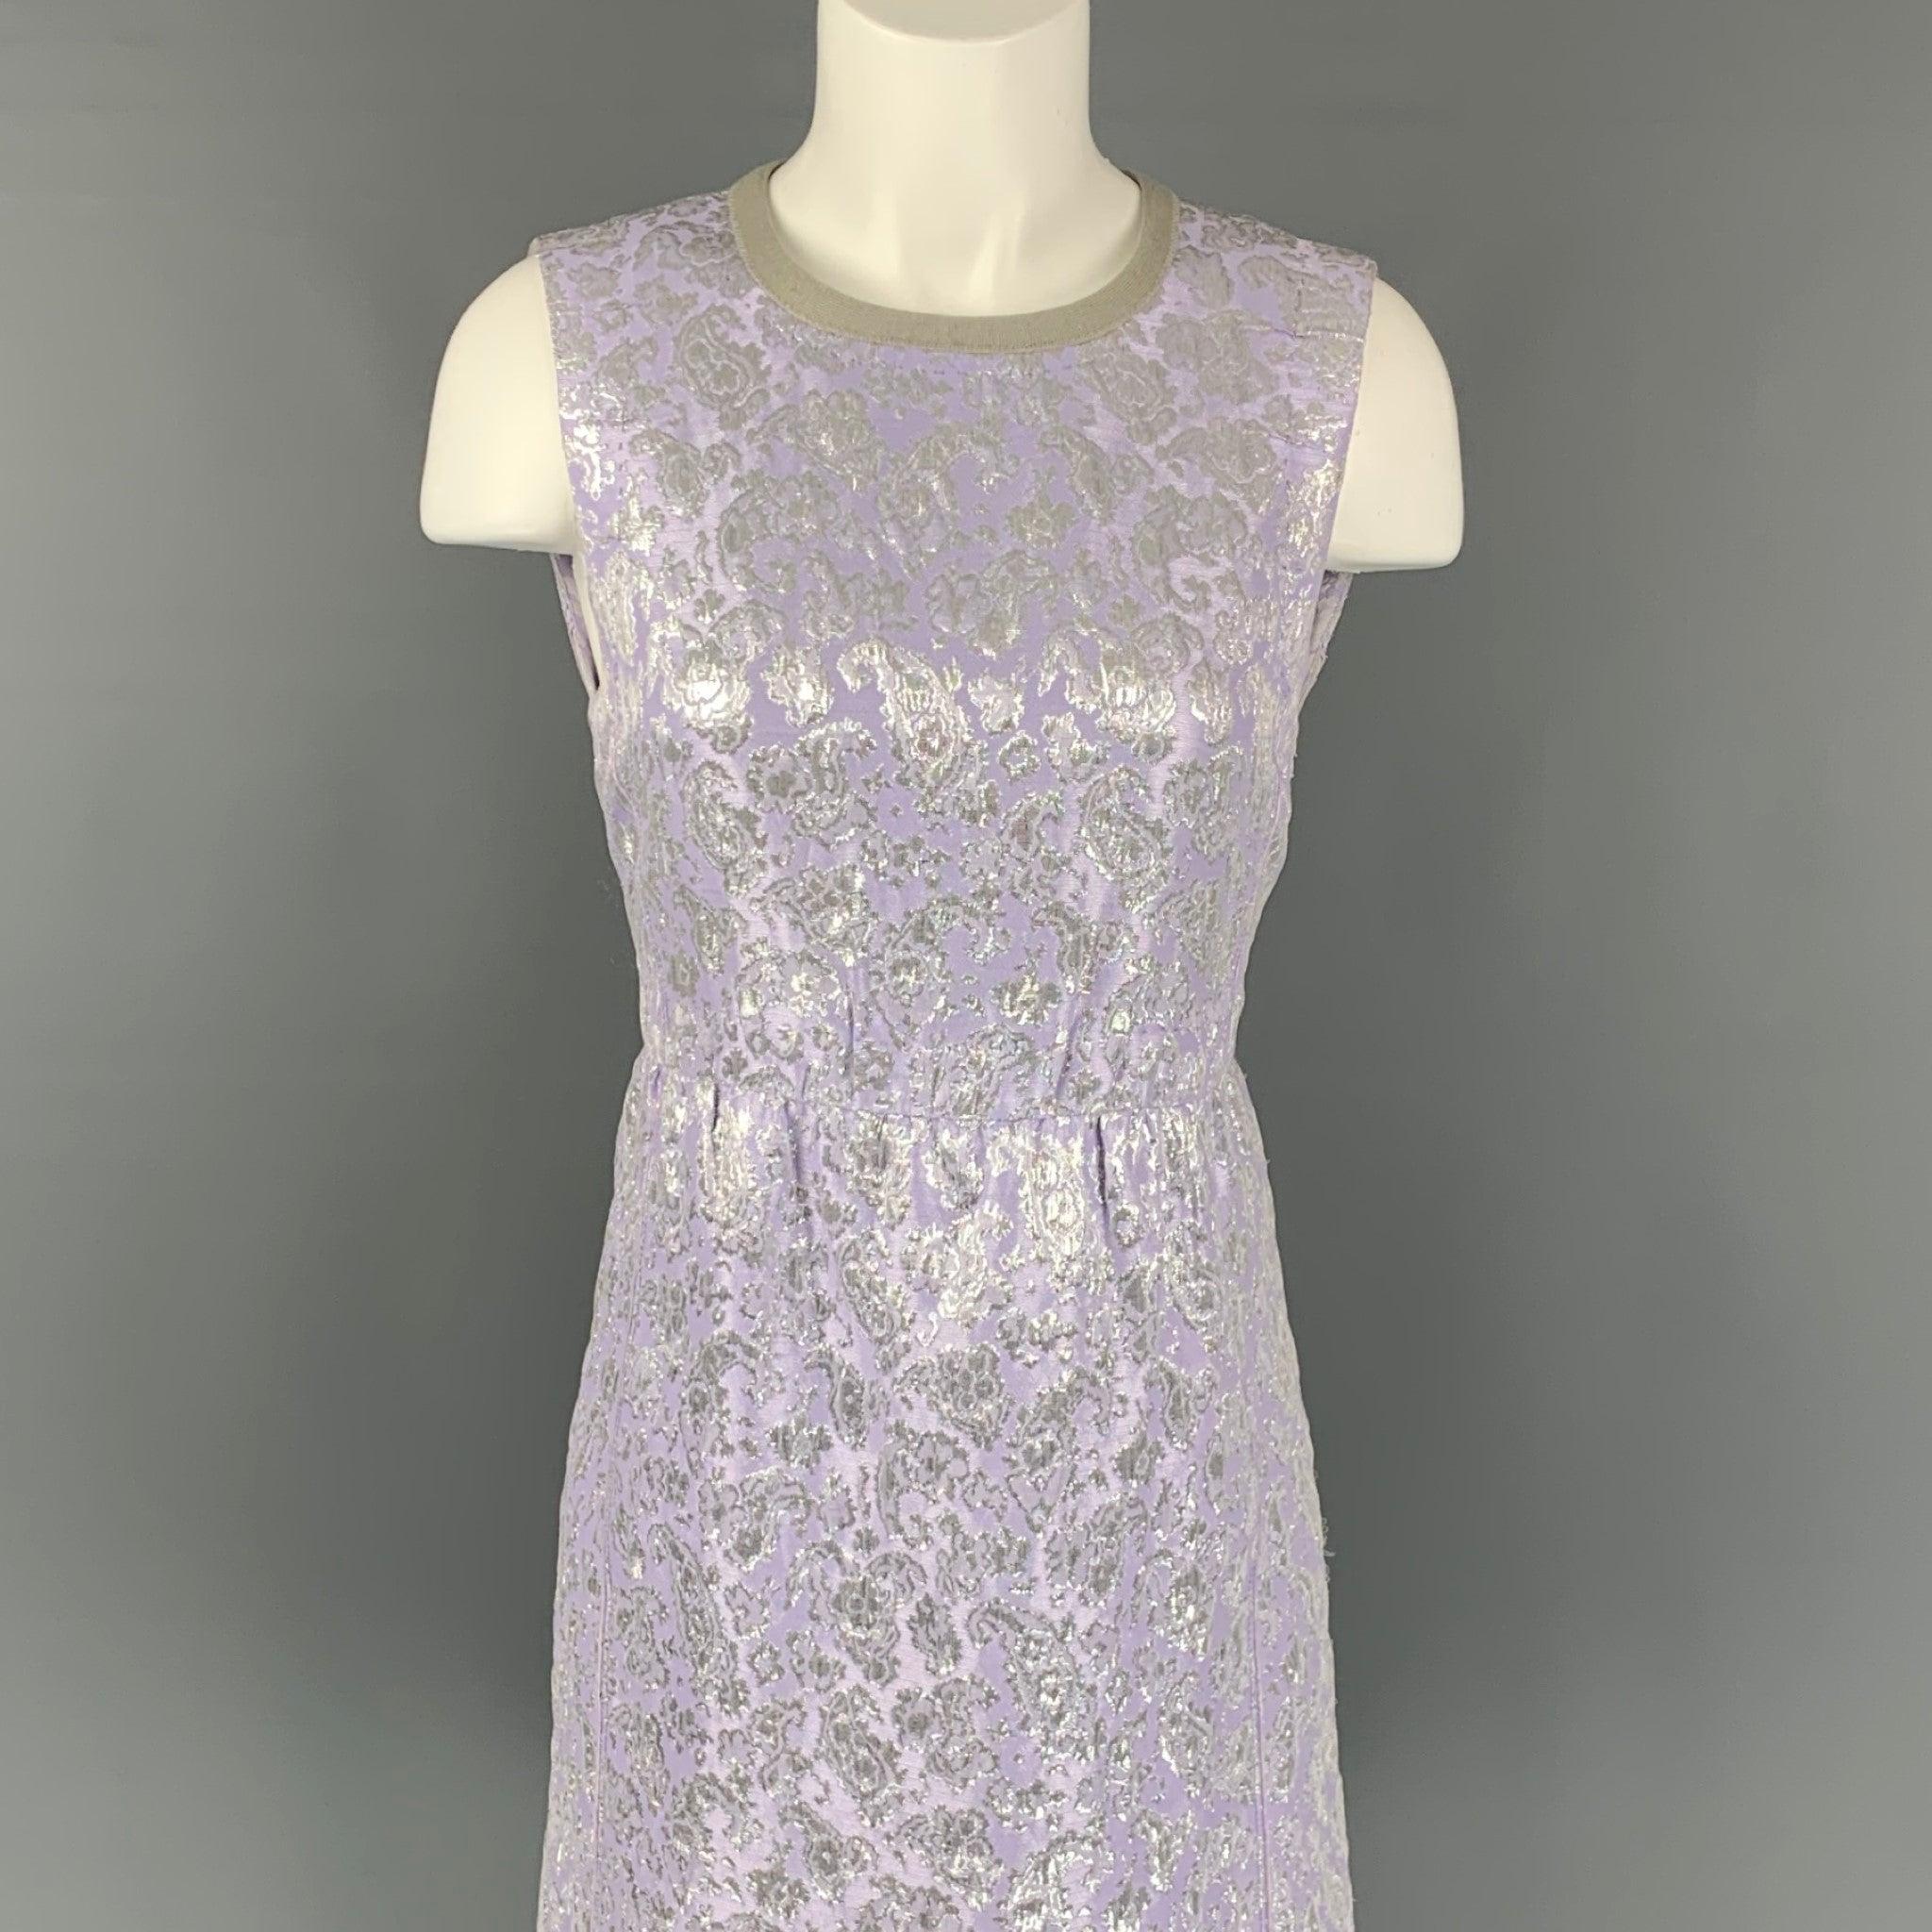 MARC JACOBS dress comes in a lavender & silver jacquard acetate blend wth a slip liner featuring a sheath style, sleeveless, and a back zipper closure. Made in USA.
Very Good Pre-Owned Condition. 

Marked:   6 

Measurements: 
 
Shoulder: 14 inches 